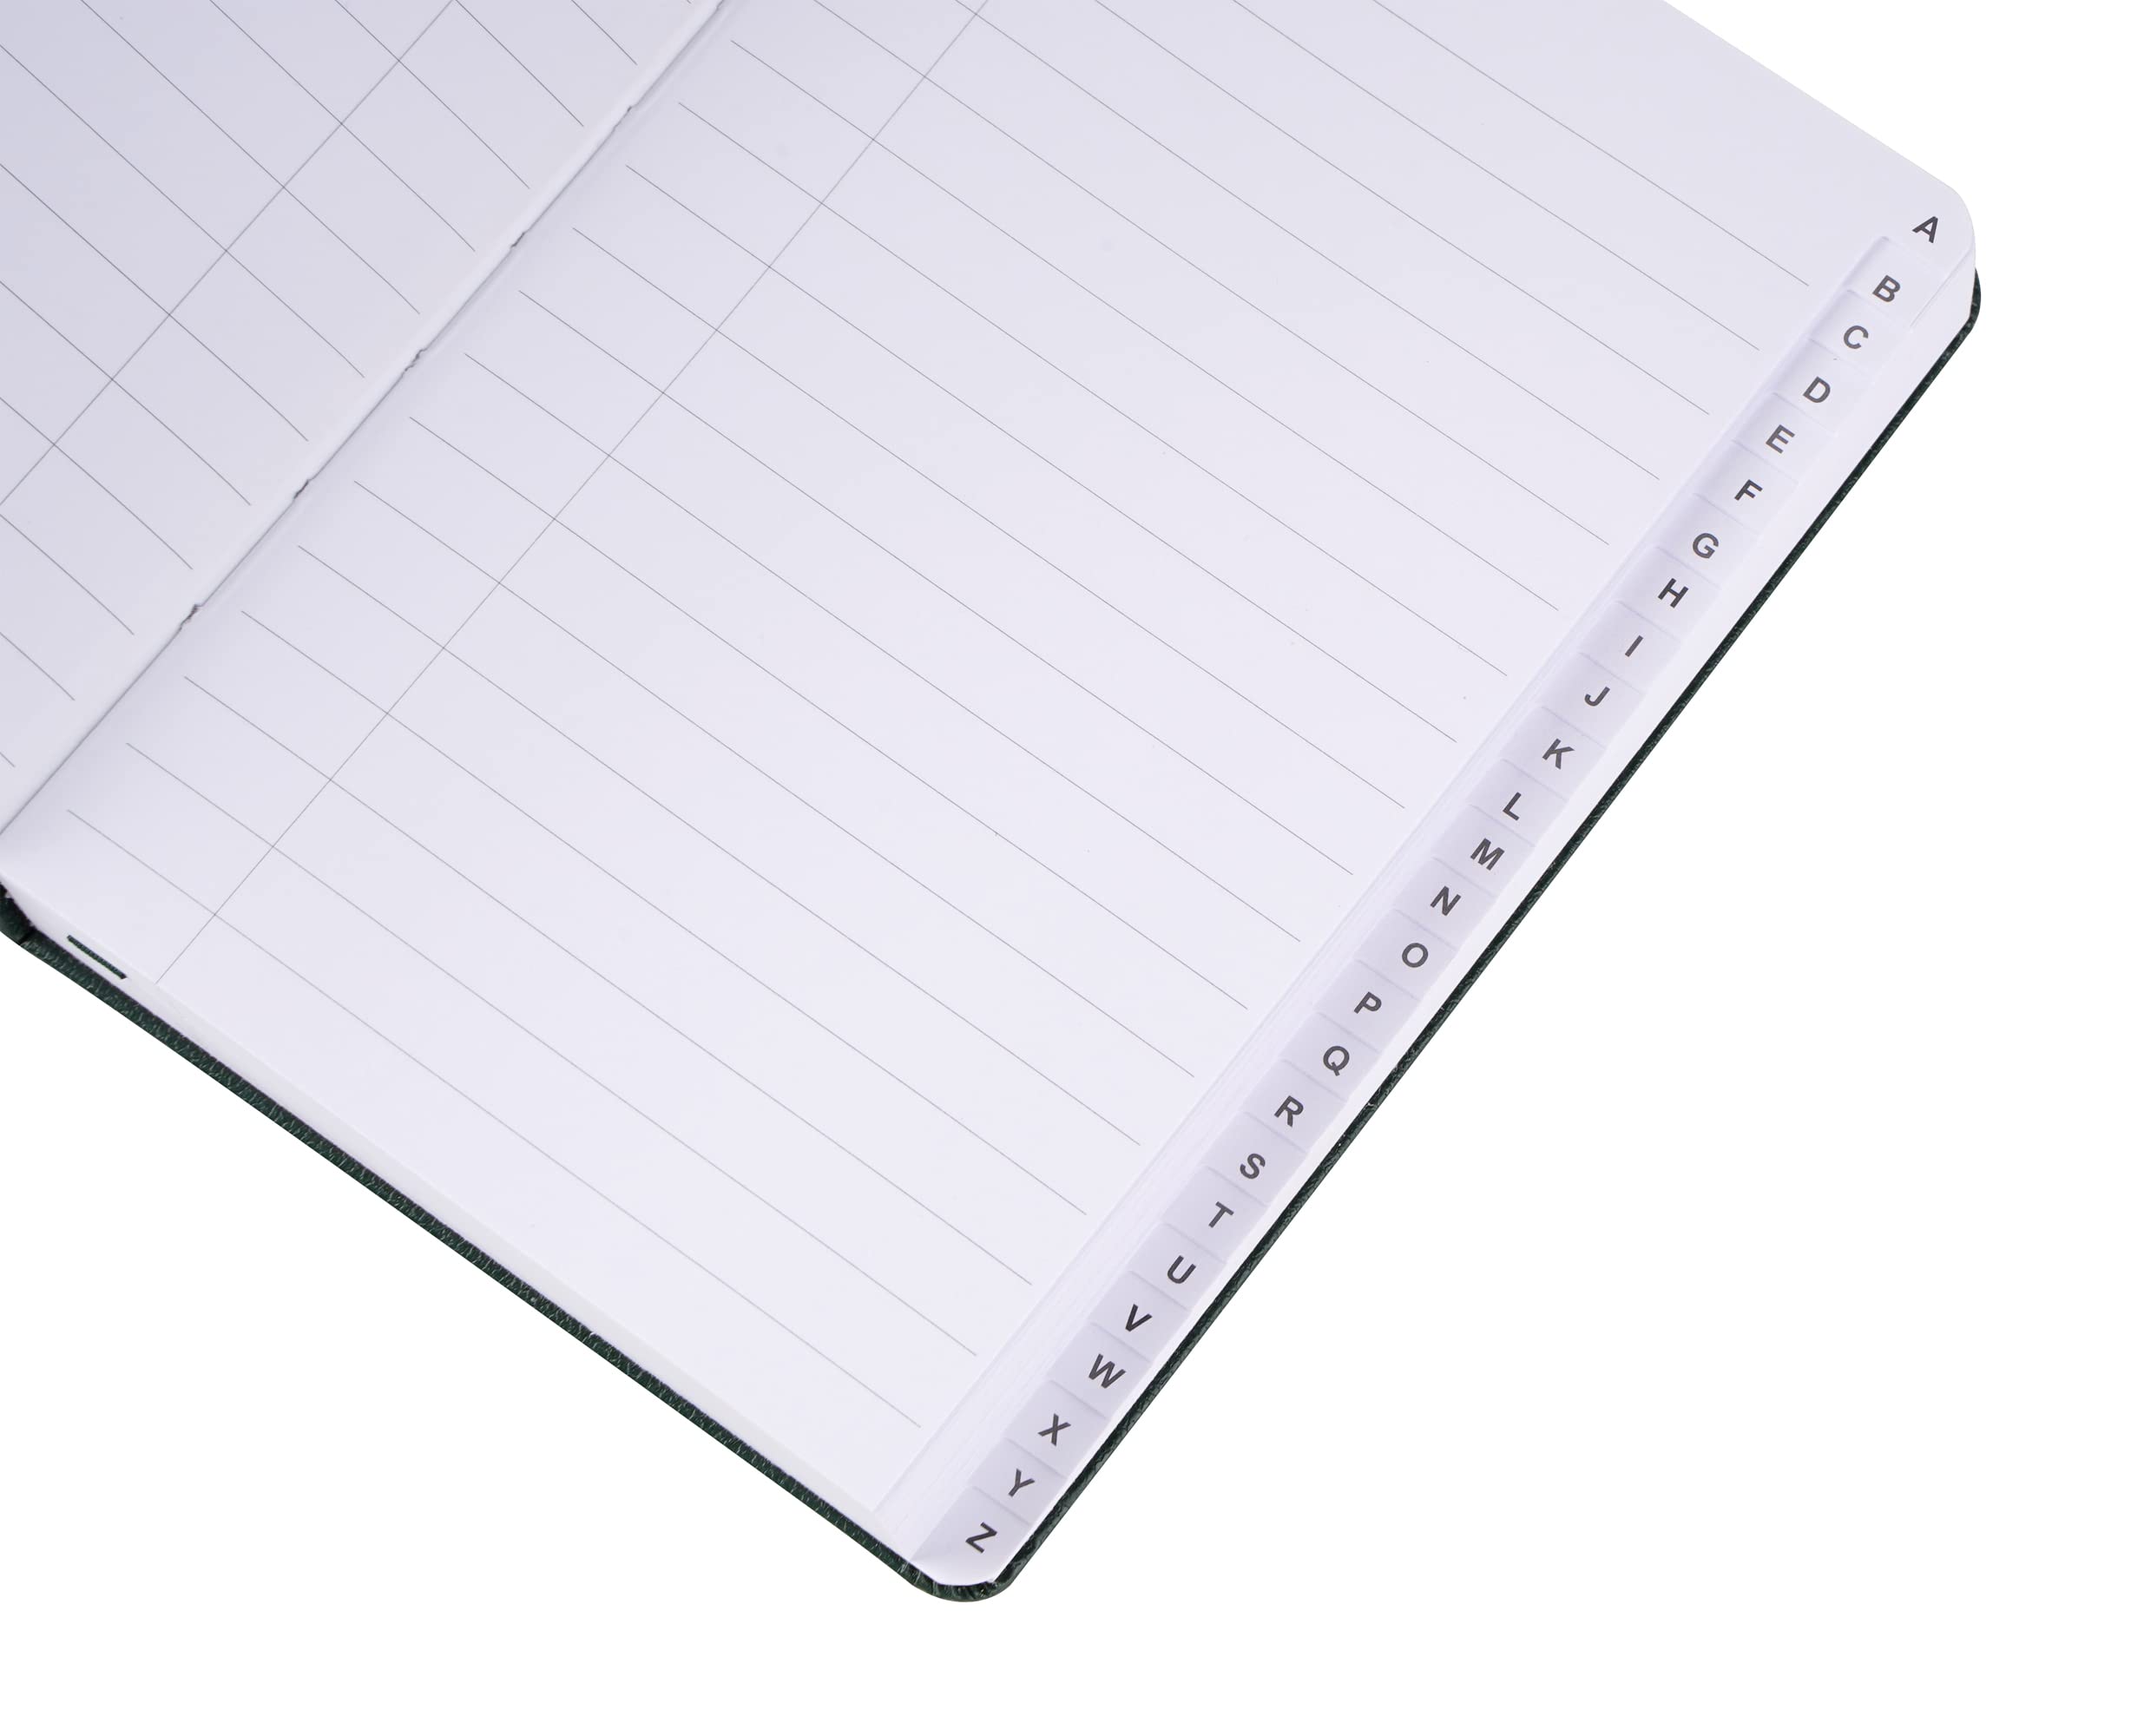 A6 Index Notebook Hardback Leatherette Cover 8mm Ruled Margin A-Z Tabs 264 Pages 100 GSM White Paper – 11 X 16 CM Index Notebook (Black)